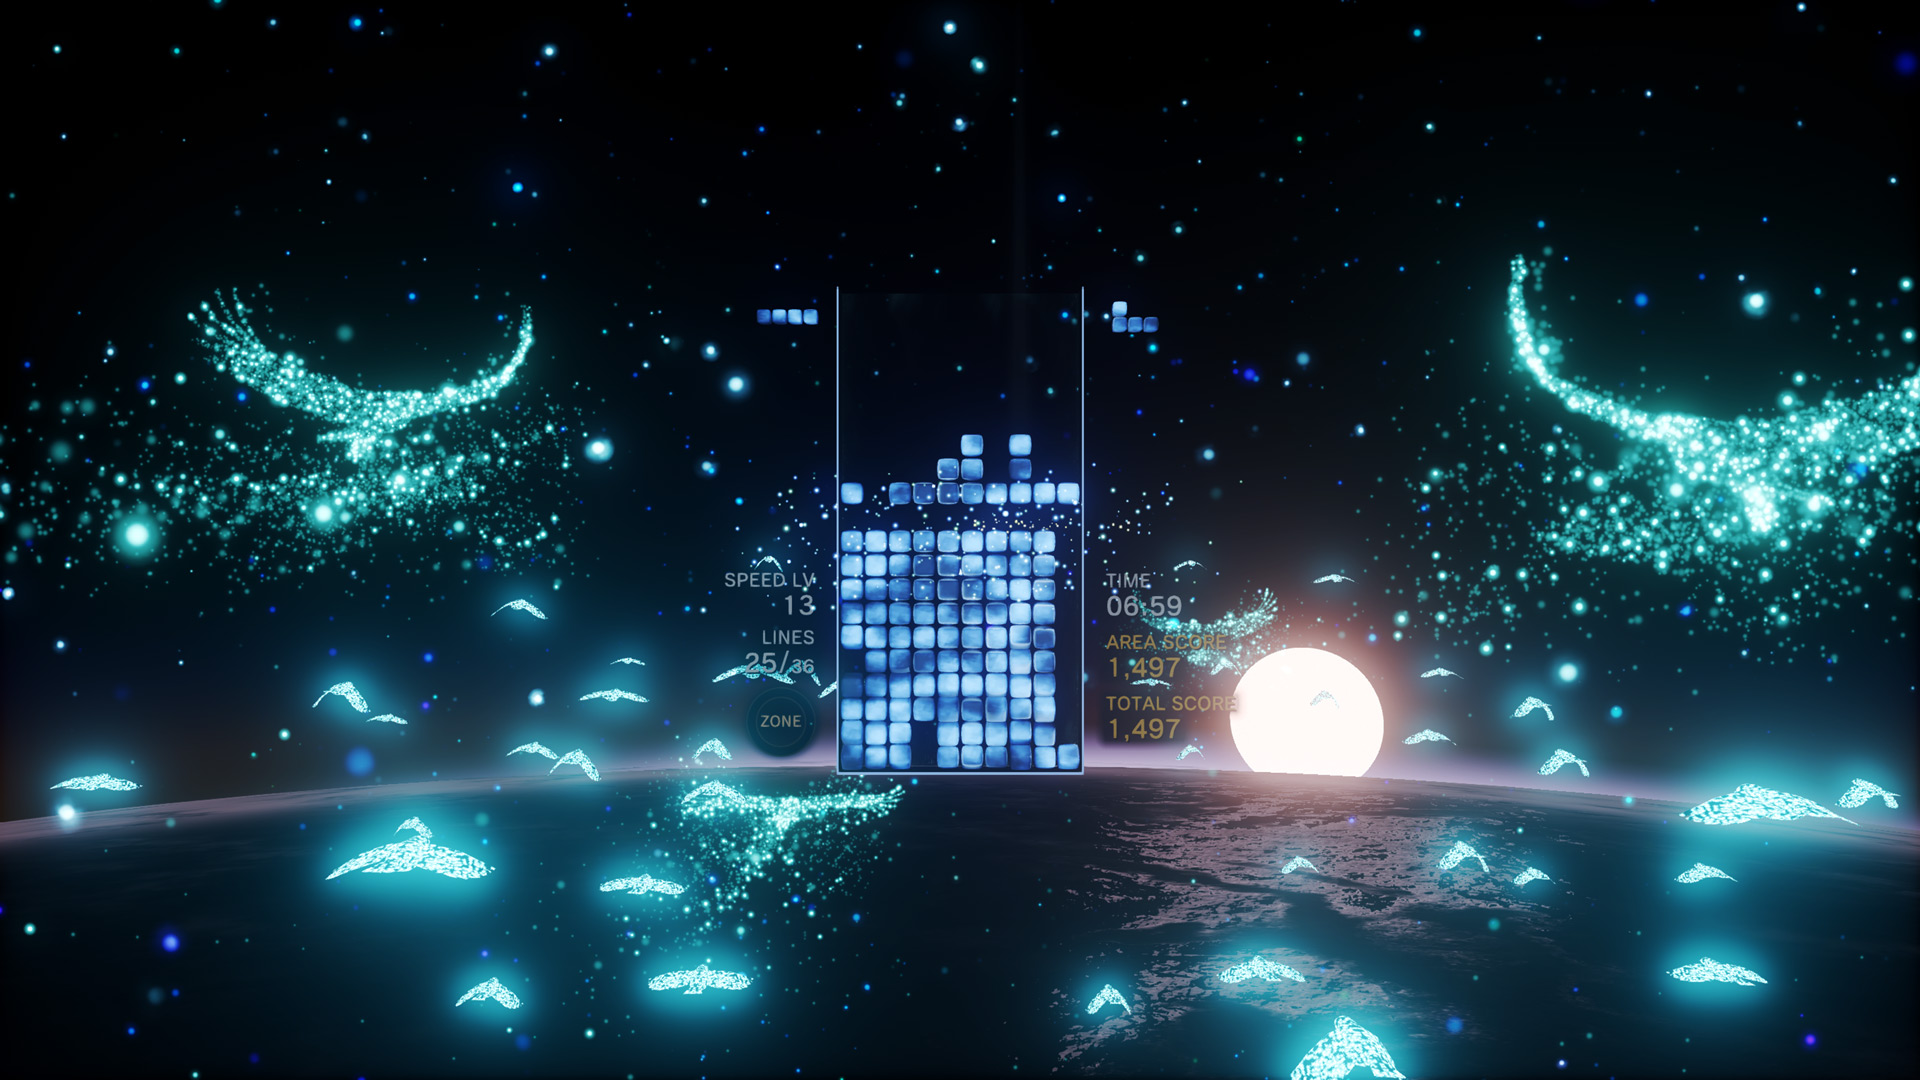 Tetris Effect Is Getting A Limited Time Free Demo This Week New Modes Revealed Road To Vr